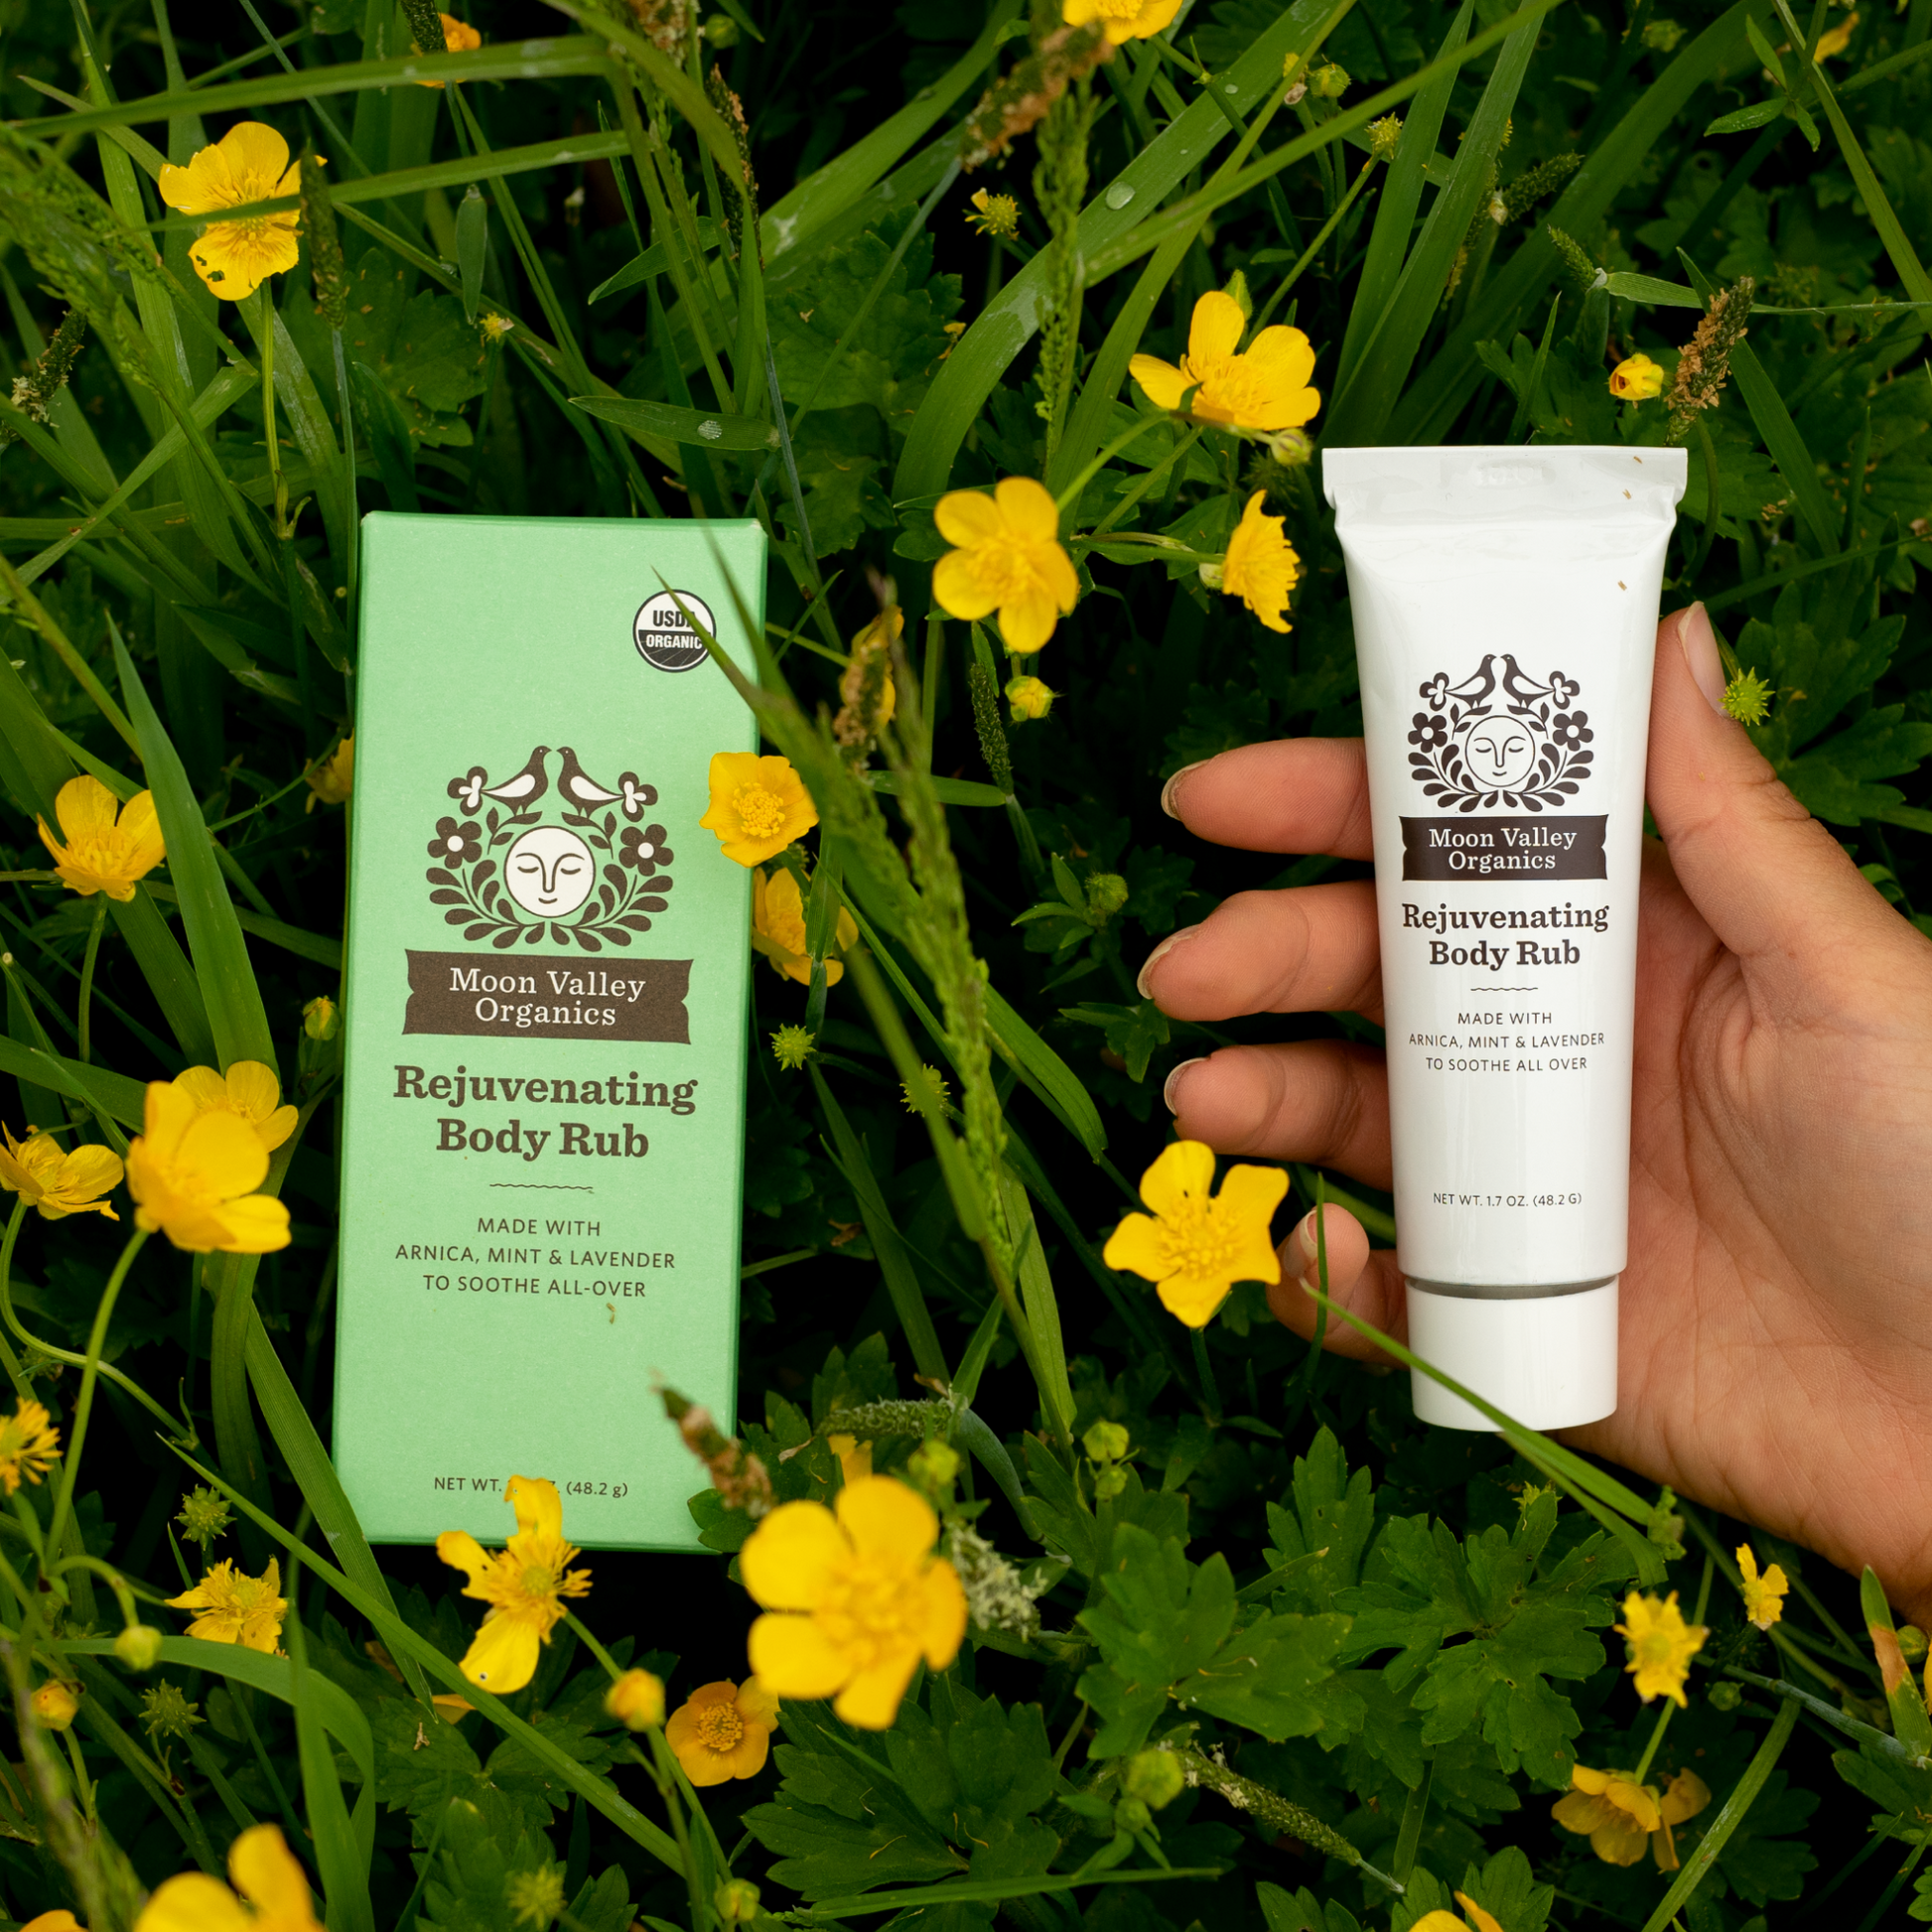 Moon Valley Organics Rejuvenating Body Rub Box laying in the grass and flowers while a hand holds the tube